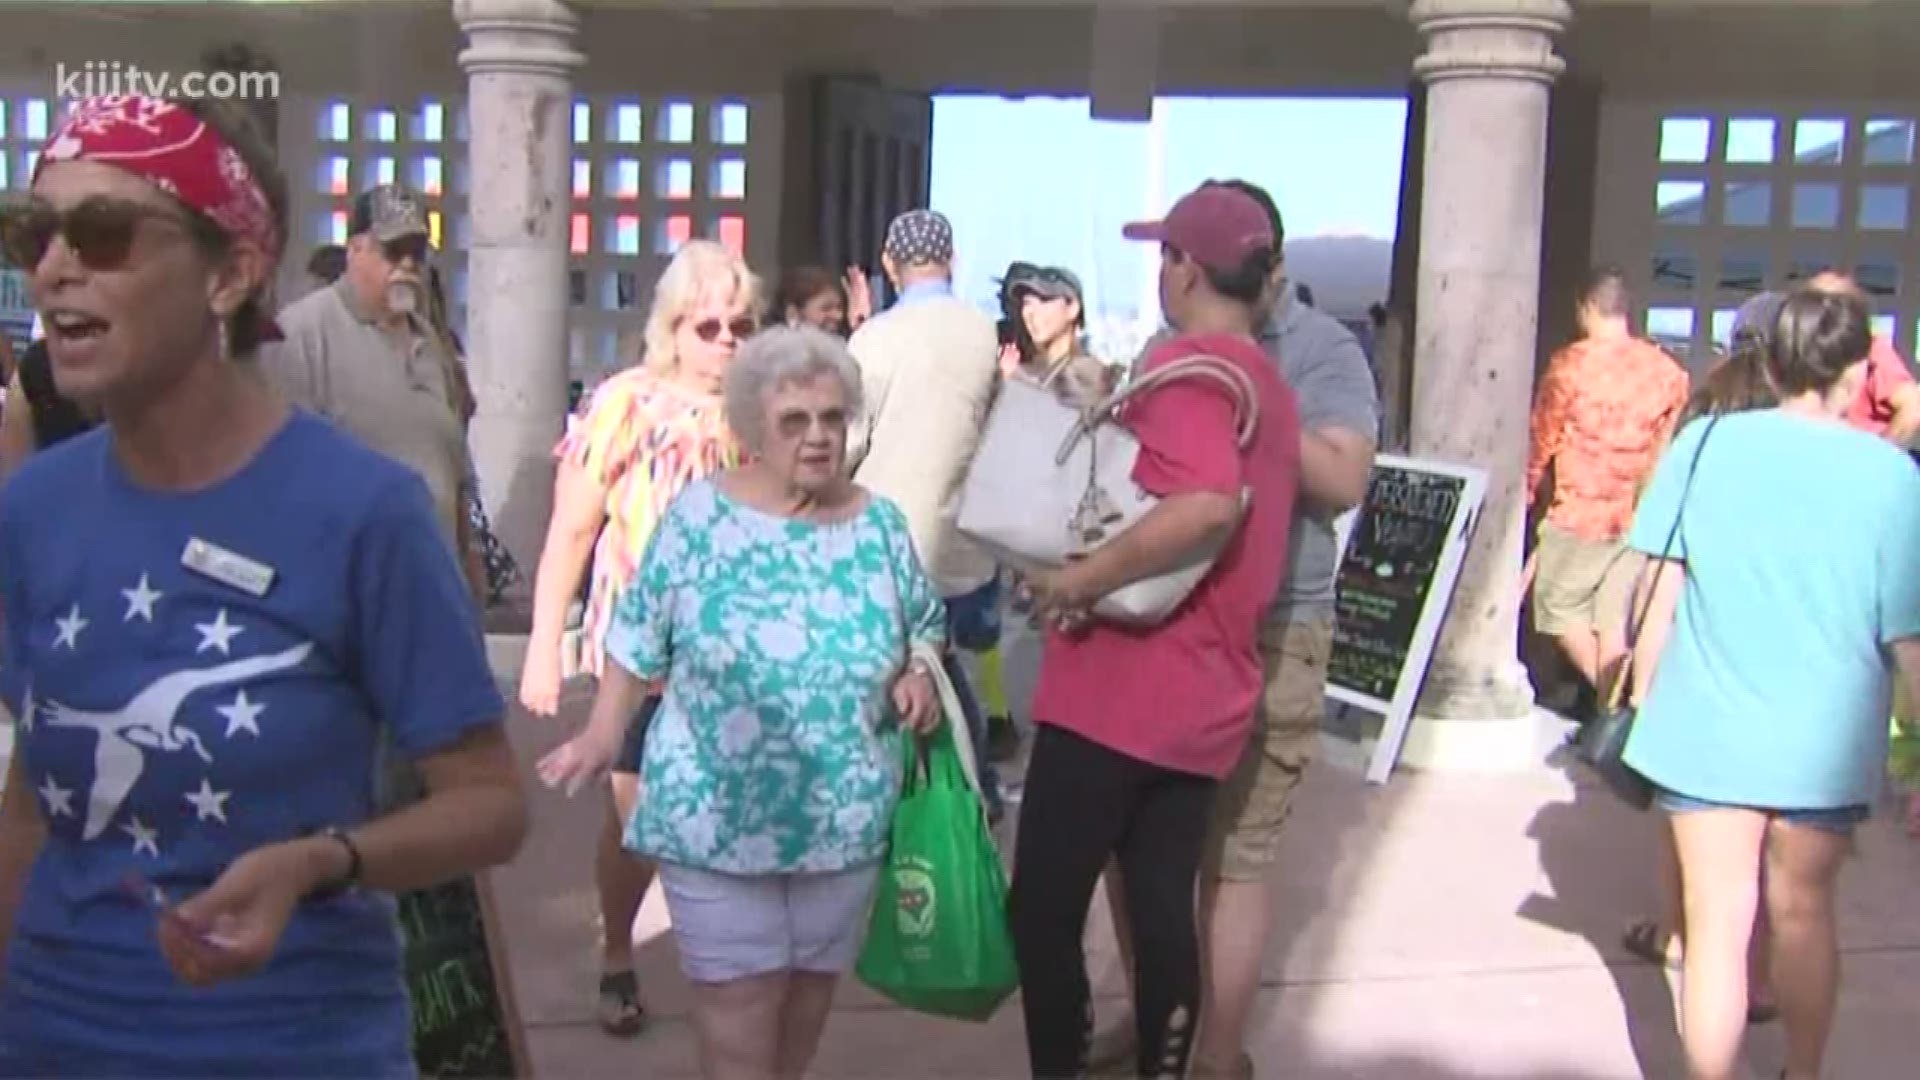 The downtown farmers market teamed up with the Corpus Christi Yacht Club to offer one of their biggest markets ever.